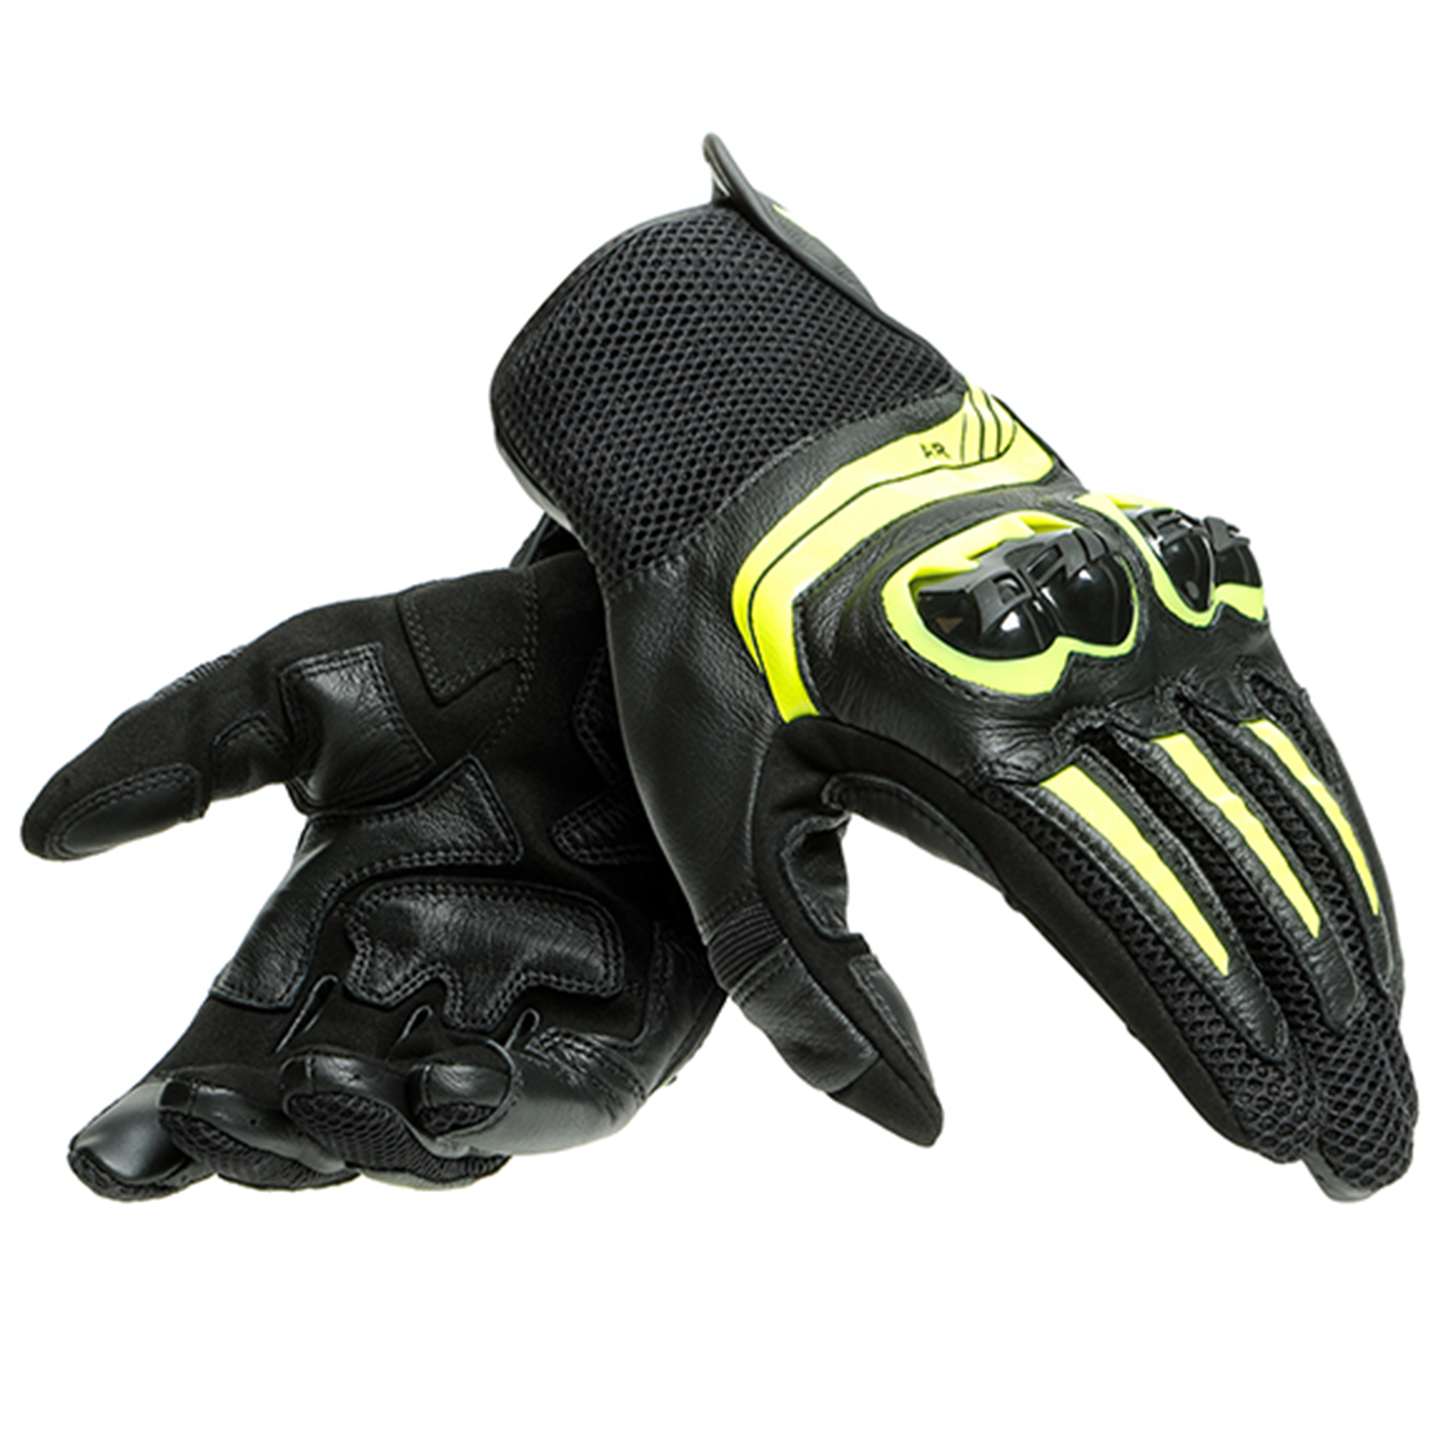 Dainese Mig 3 Leather Motorcycle Gloves - Black/Flo Yellow